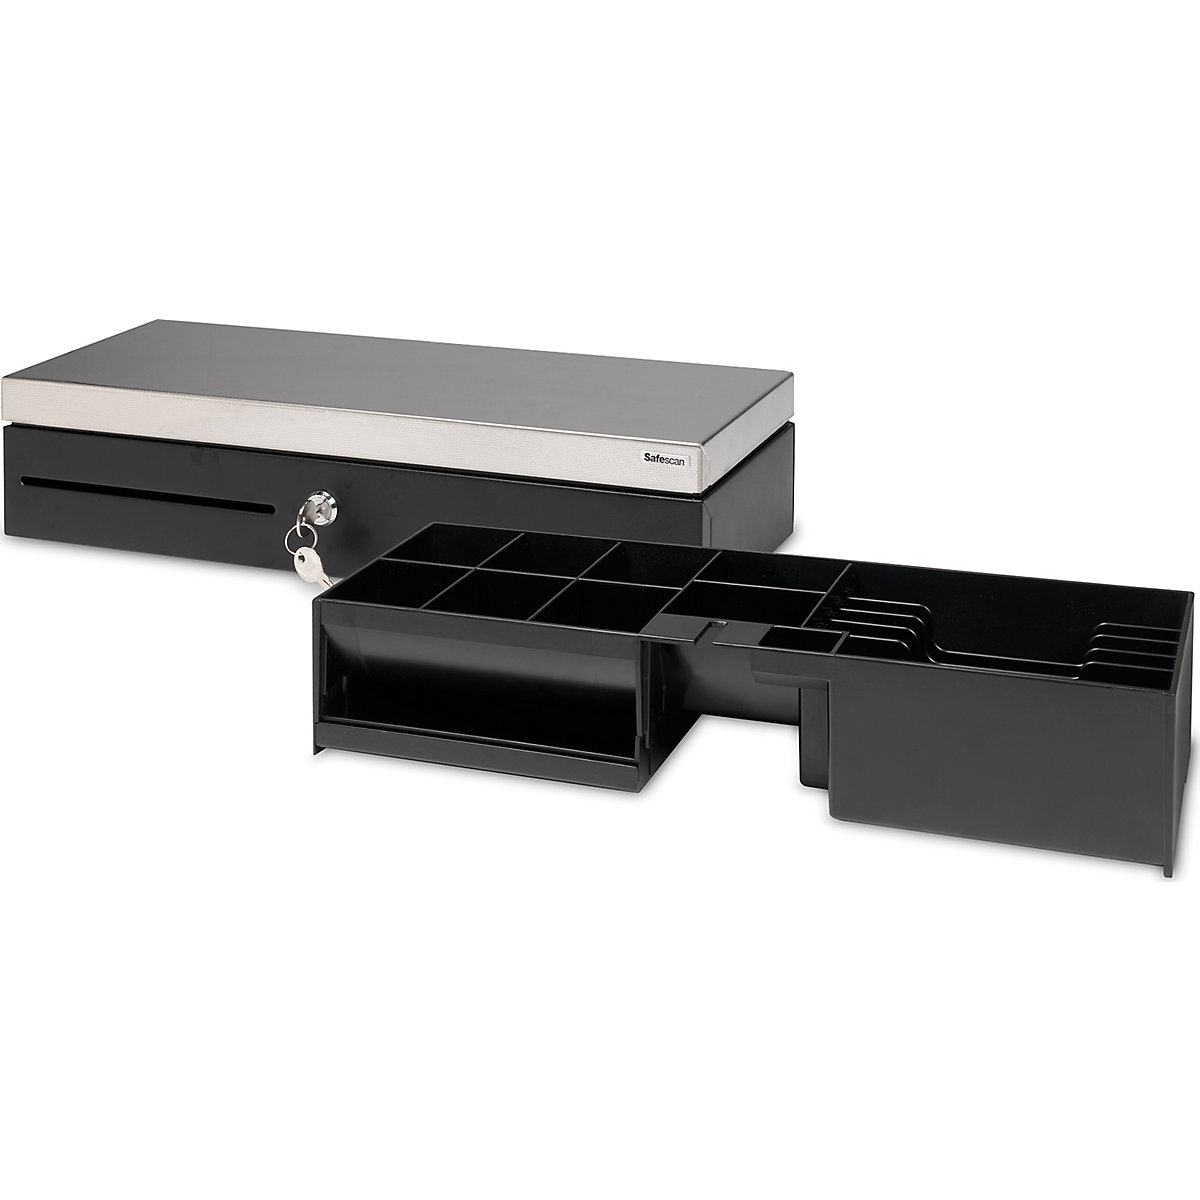 Cash drawer with hinged lid - Safescan